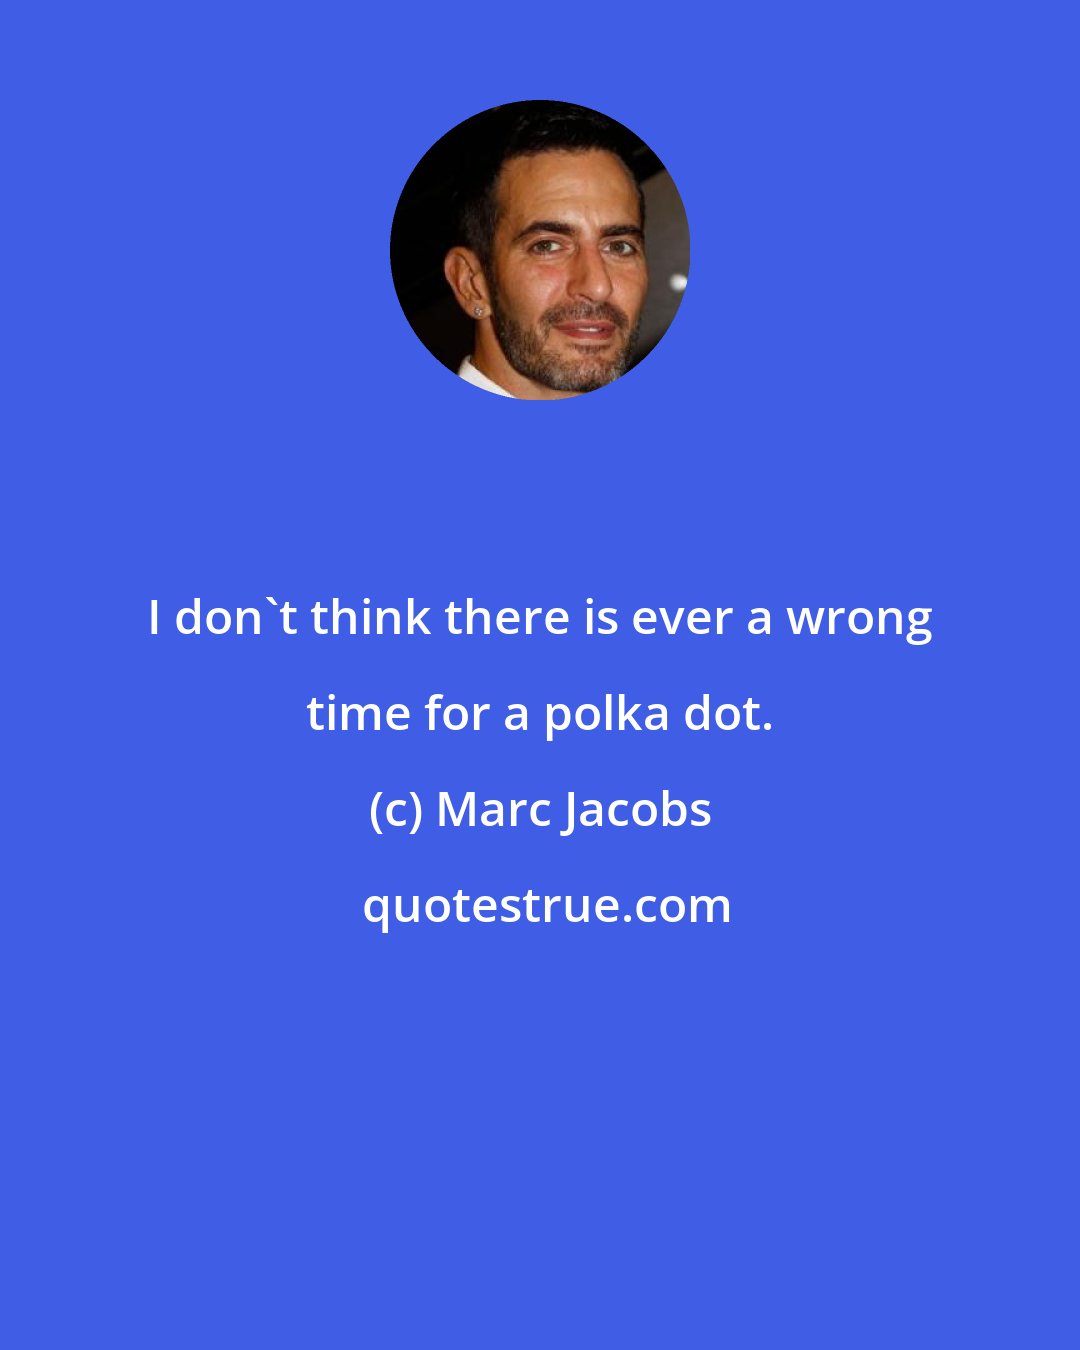 Marc Jacobs: I don't think there is ever a wrong time for a polka dot.